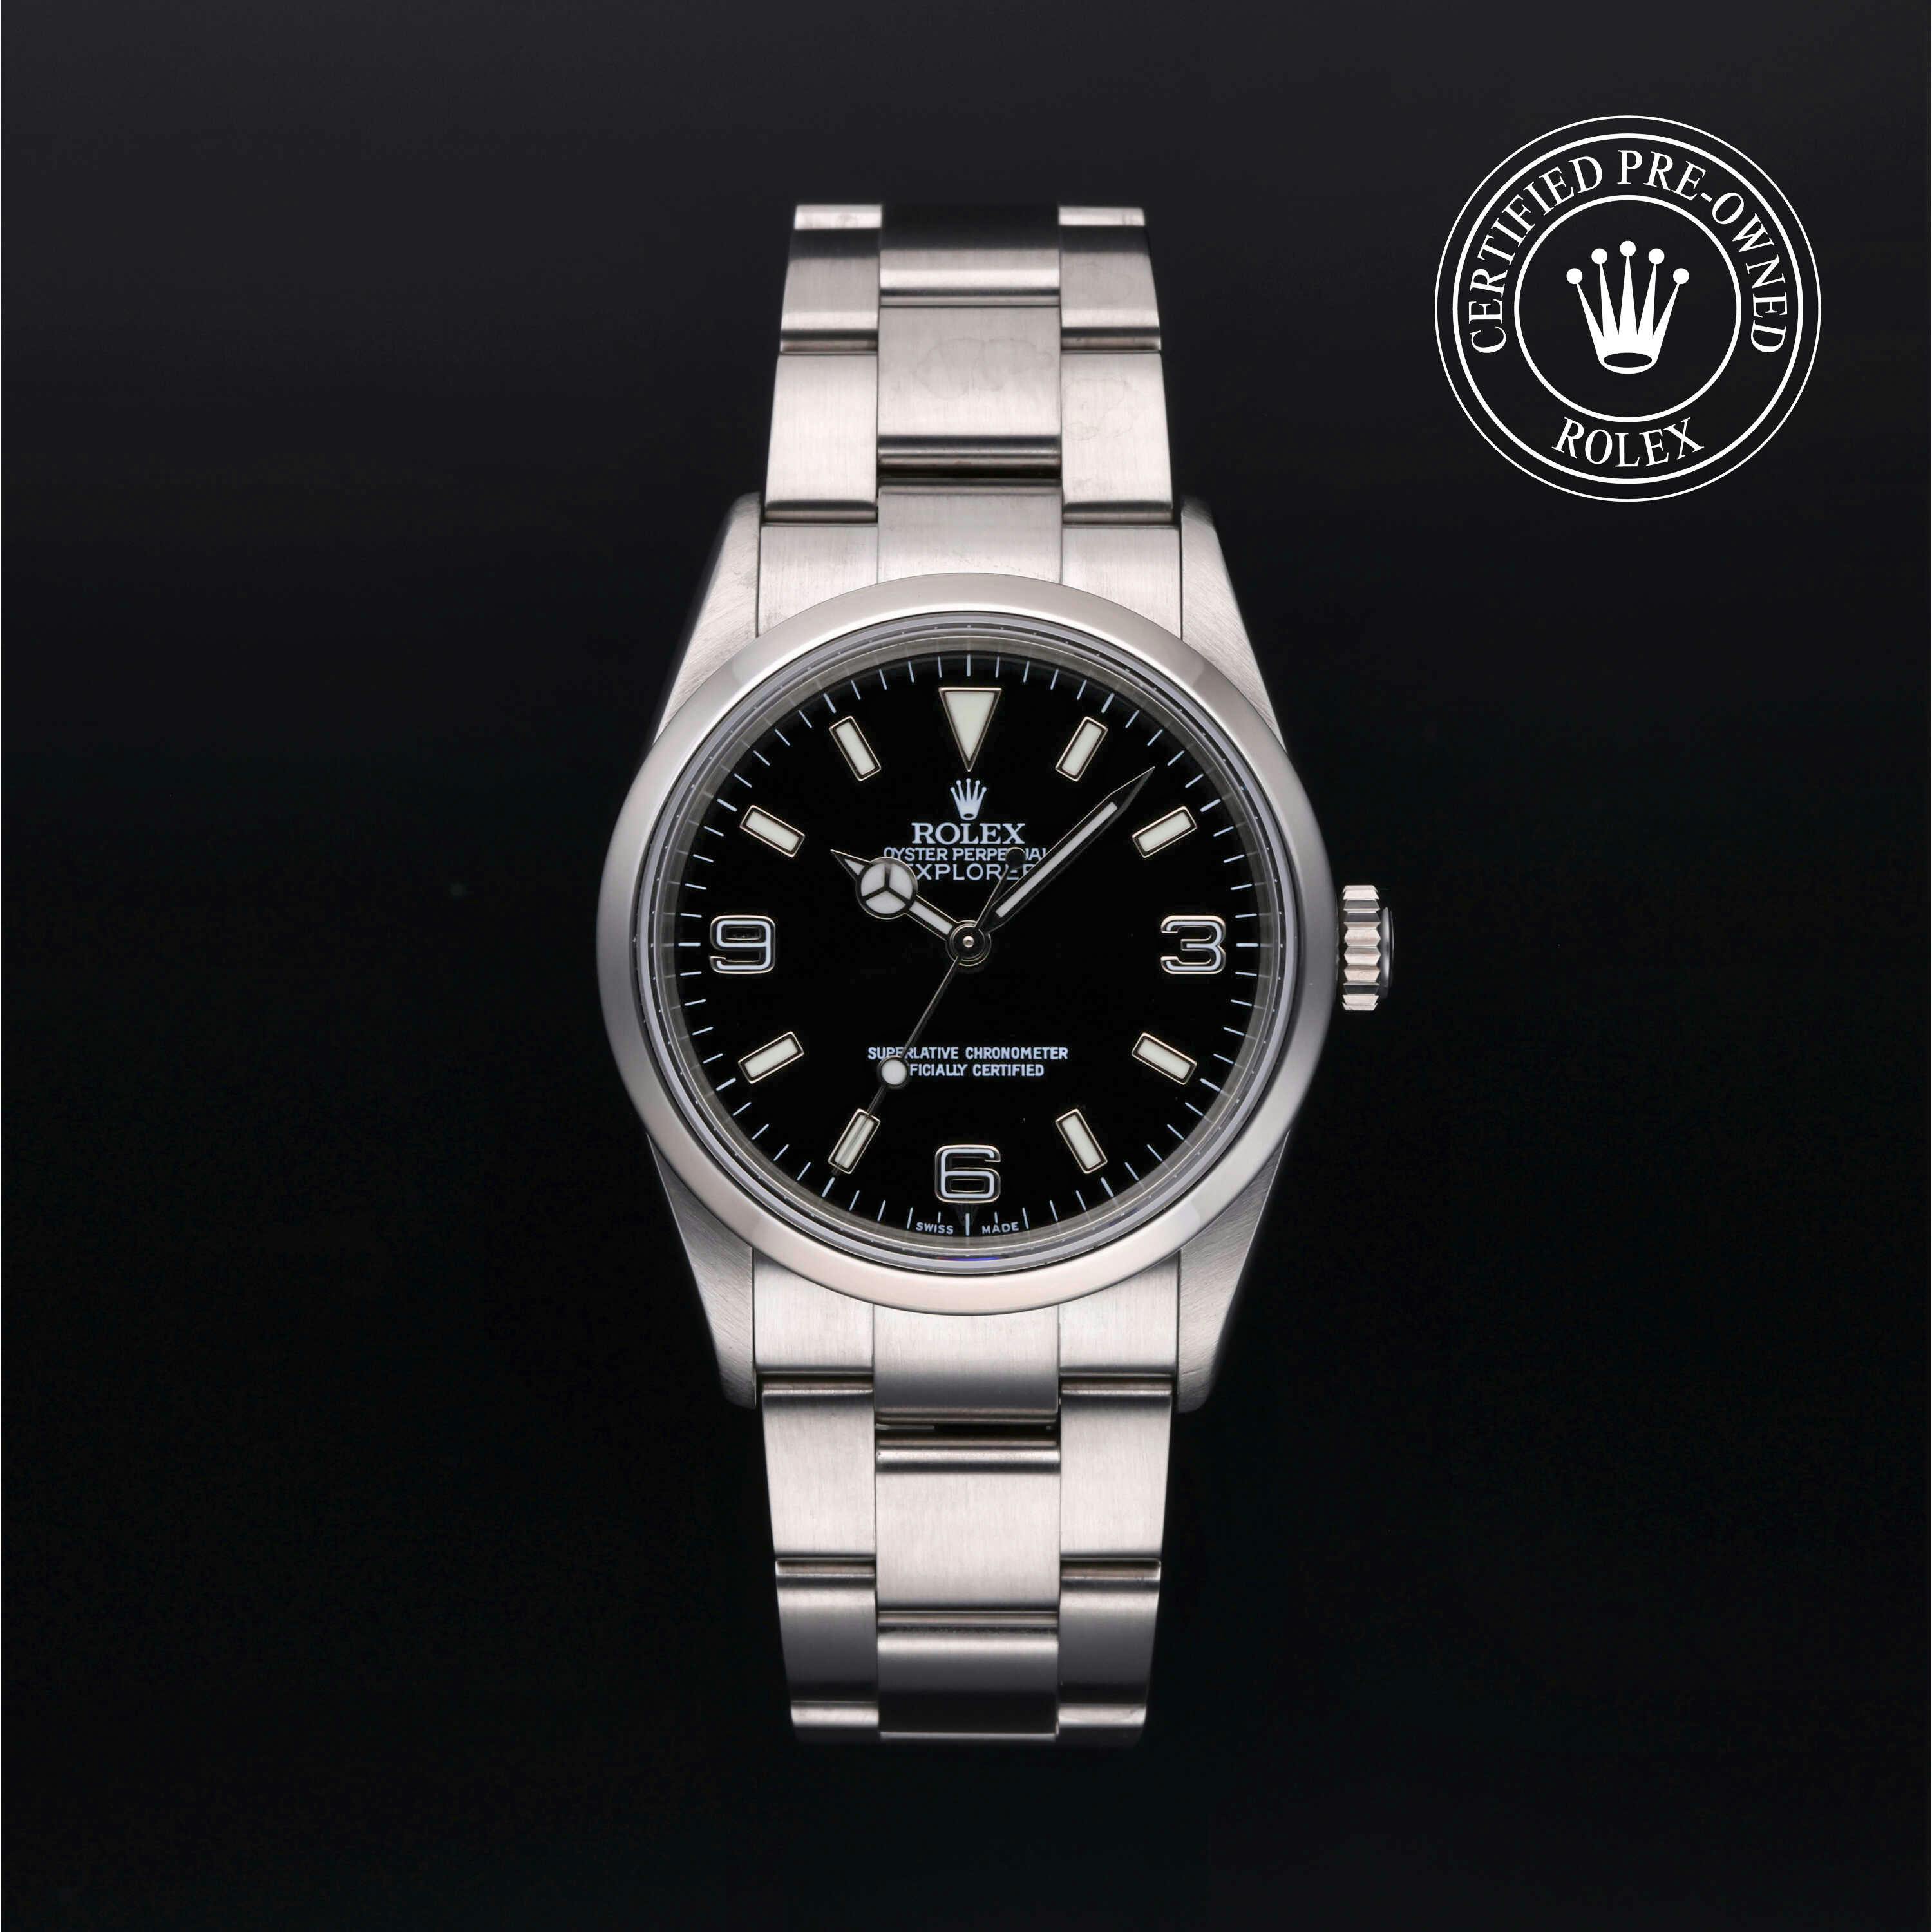 Oyster Perpetual Explorer 36